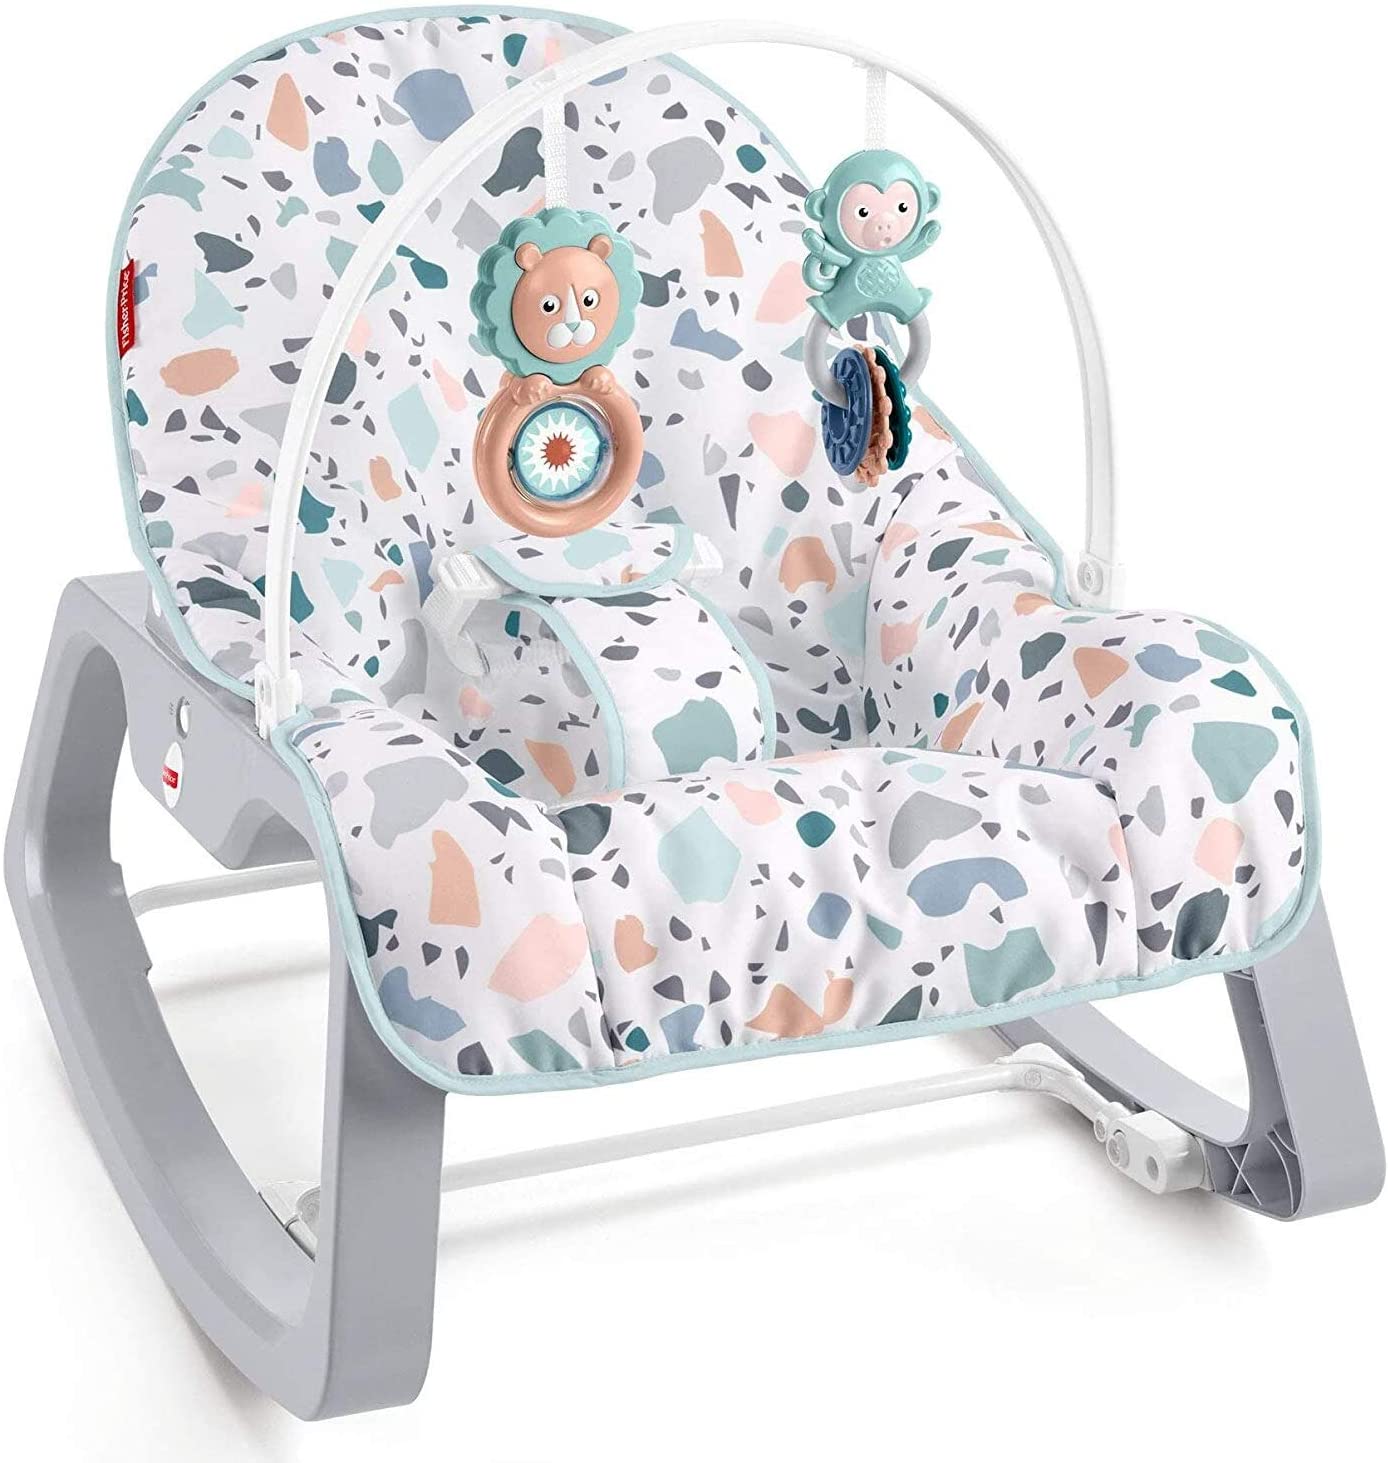 baby-fair Fisher Price Infant-to-Toddler Rocker - Pacific Pebble